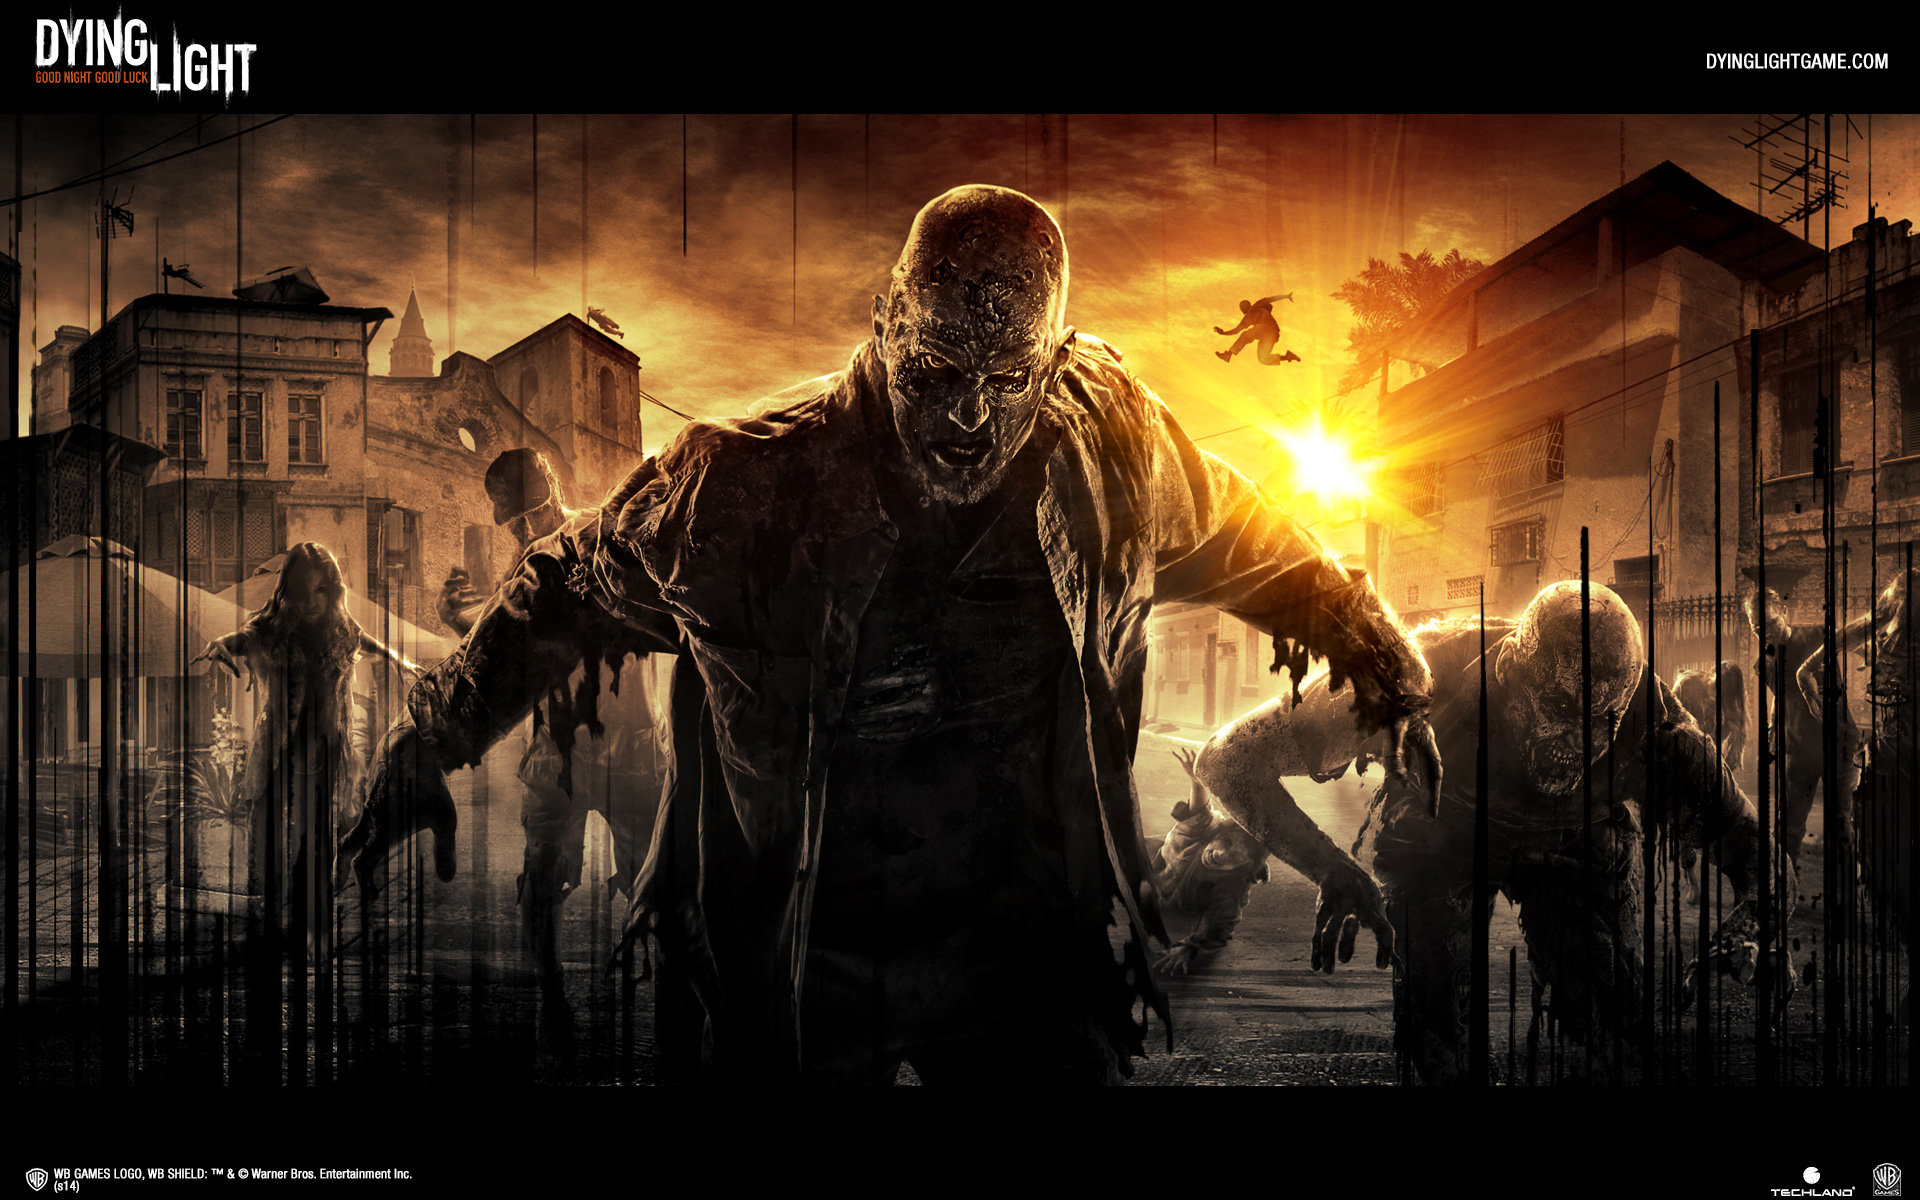 Download hd 1920x1200 Dying Light desktop background ID:54469 for free